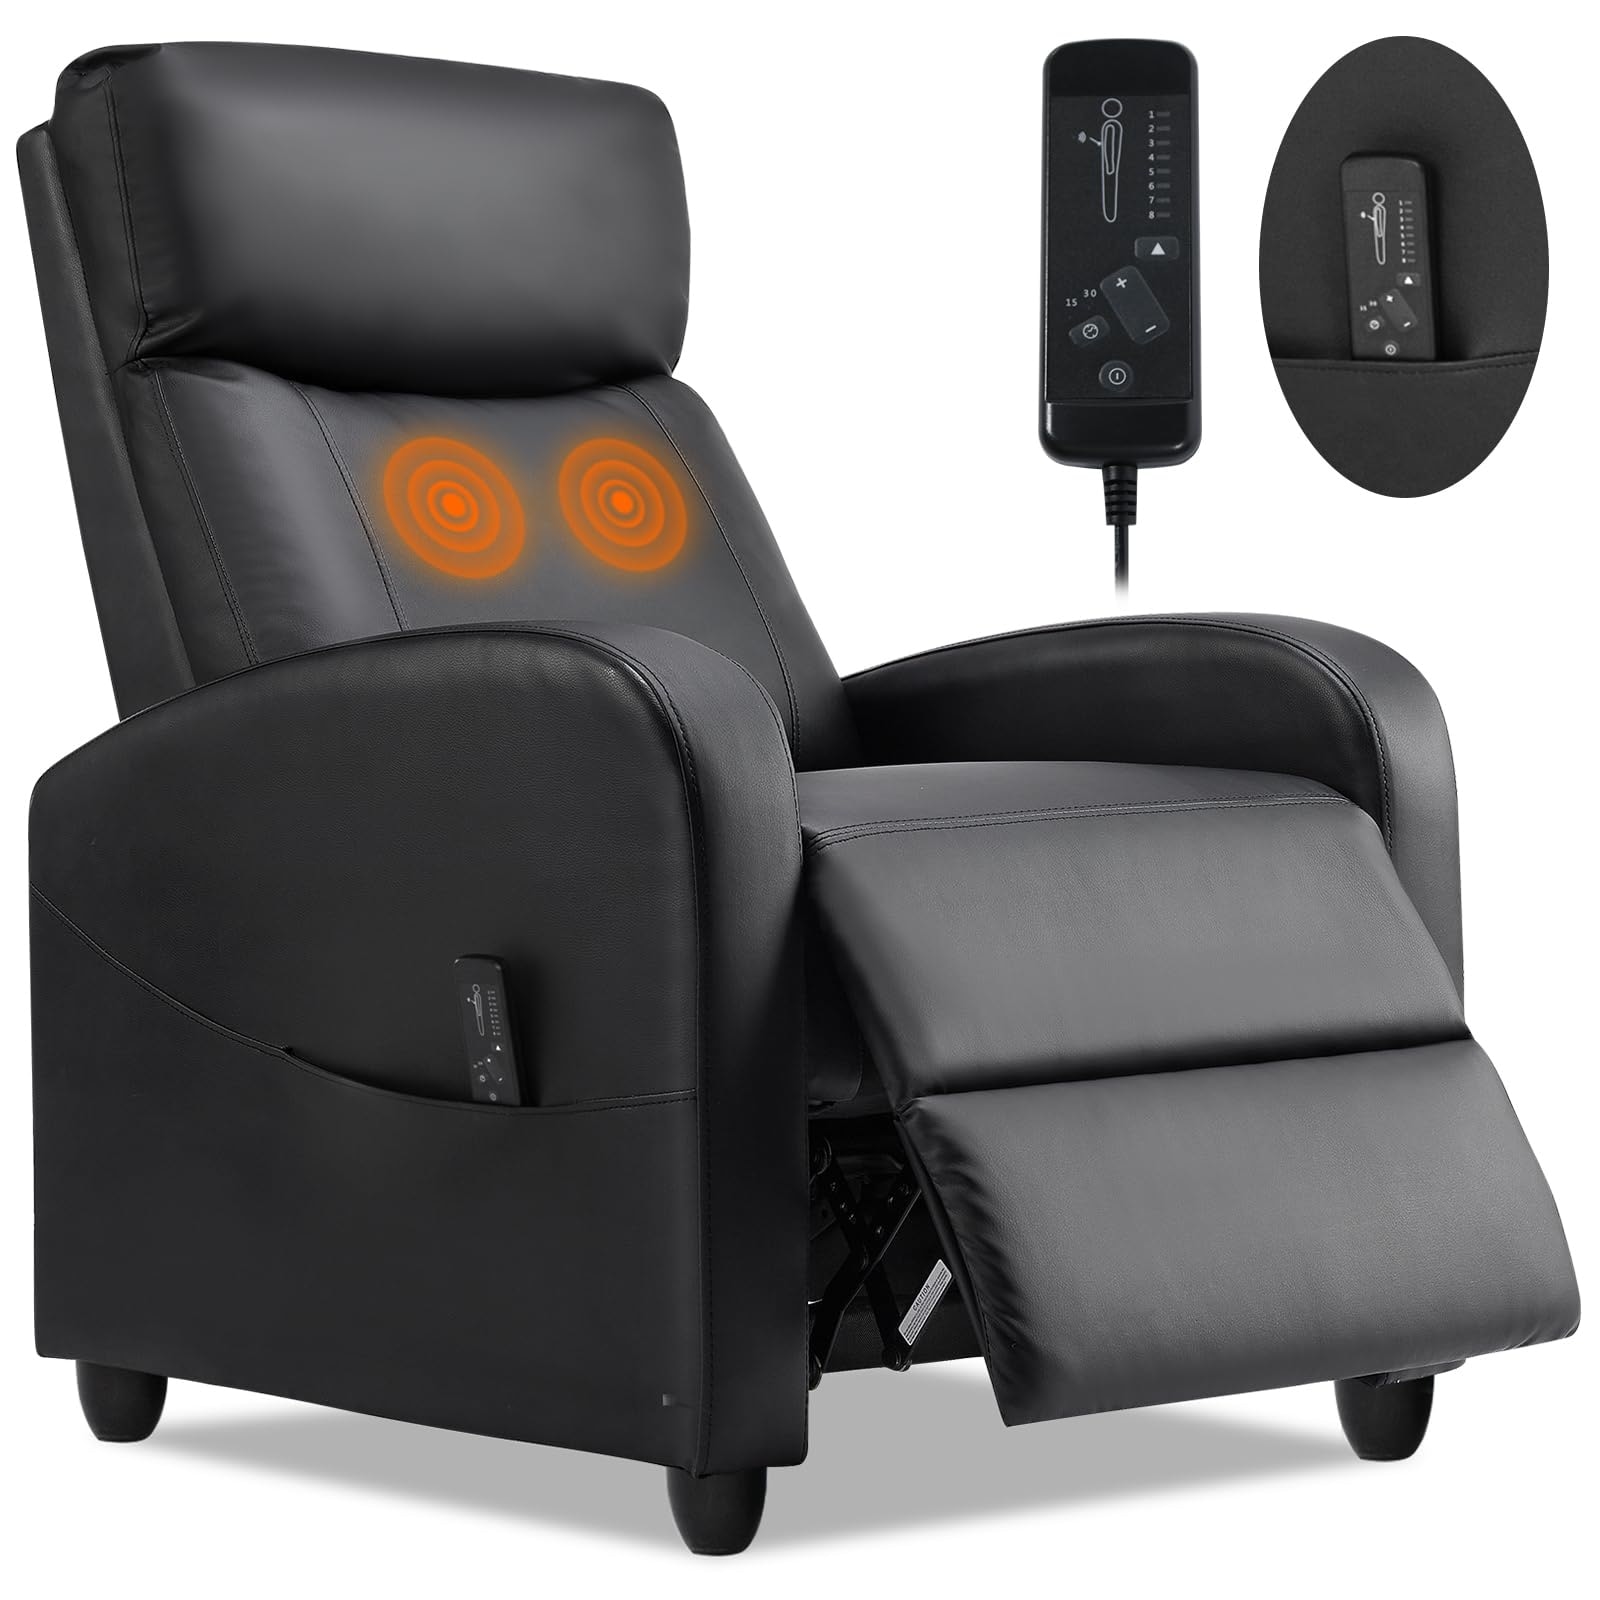 Recliner Chair For Living Room  Massage Pu Leather Recliner Sofa Home Theater Seating With Lumbar Support Winback Single Sofa